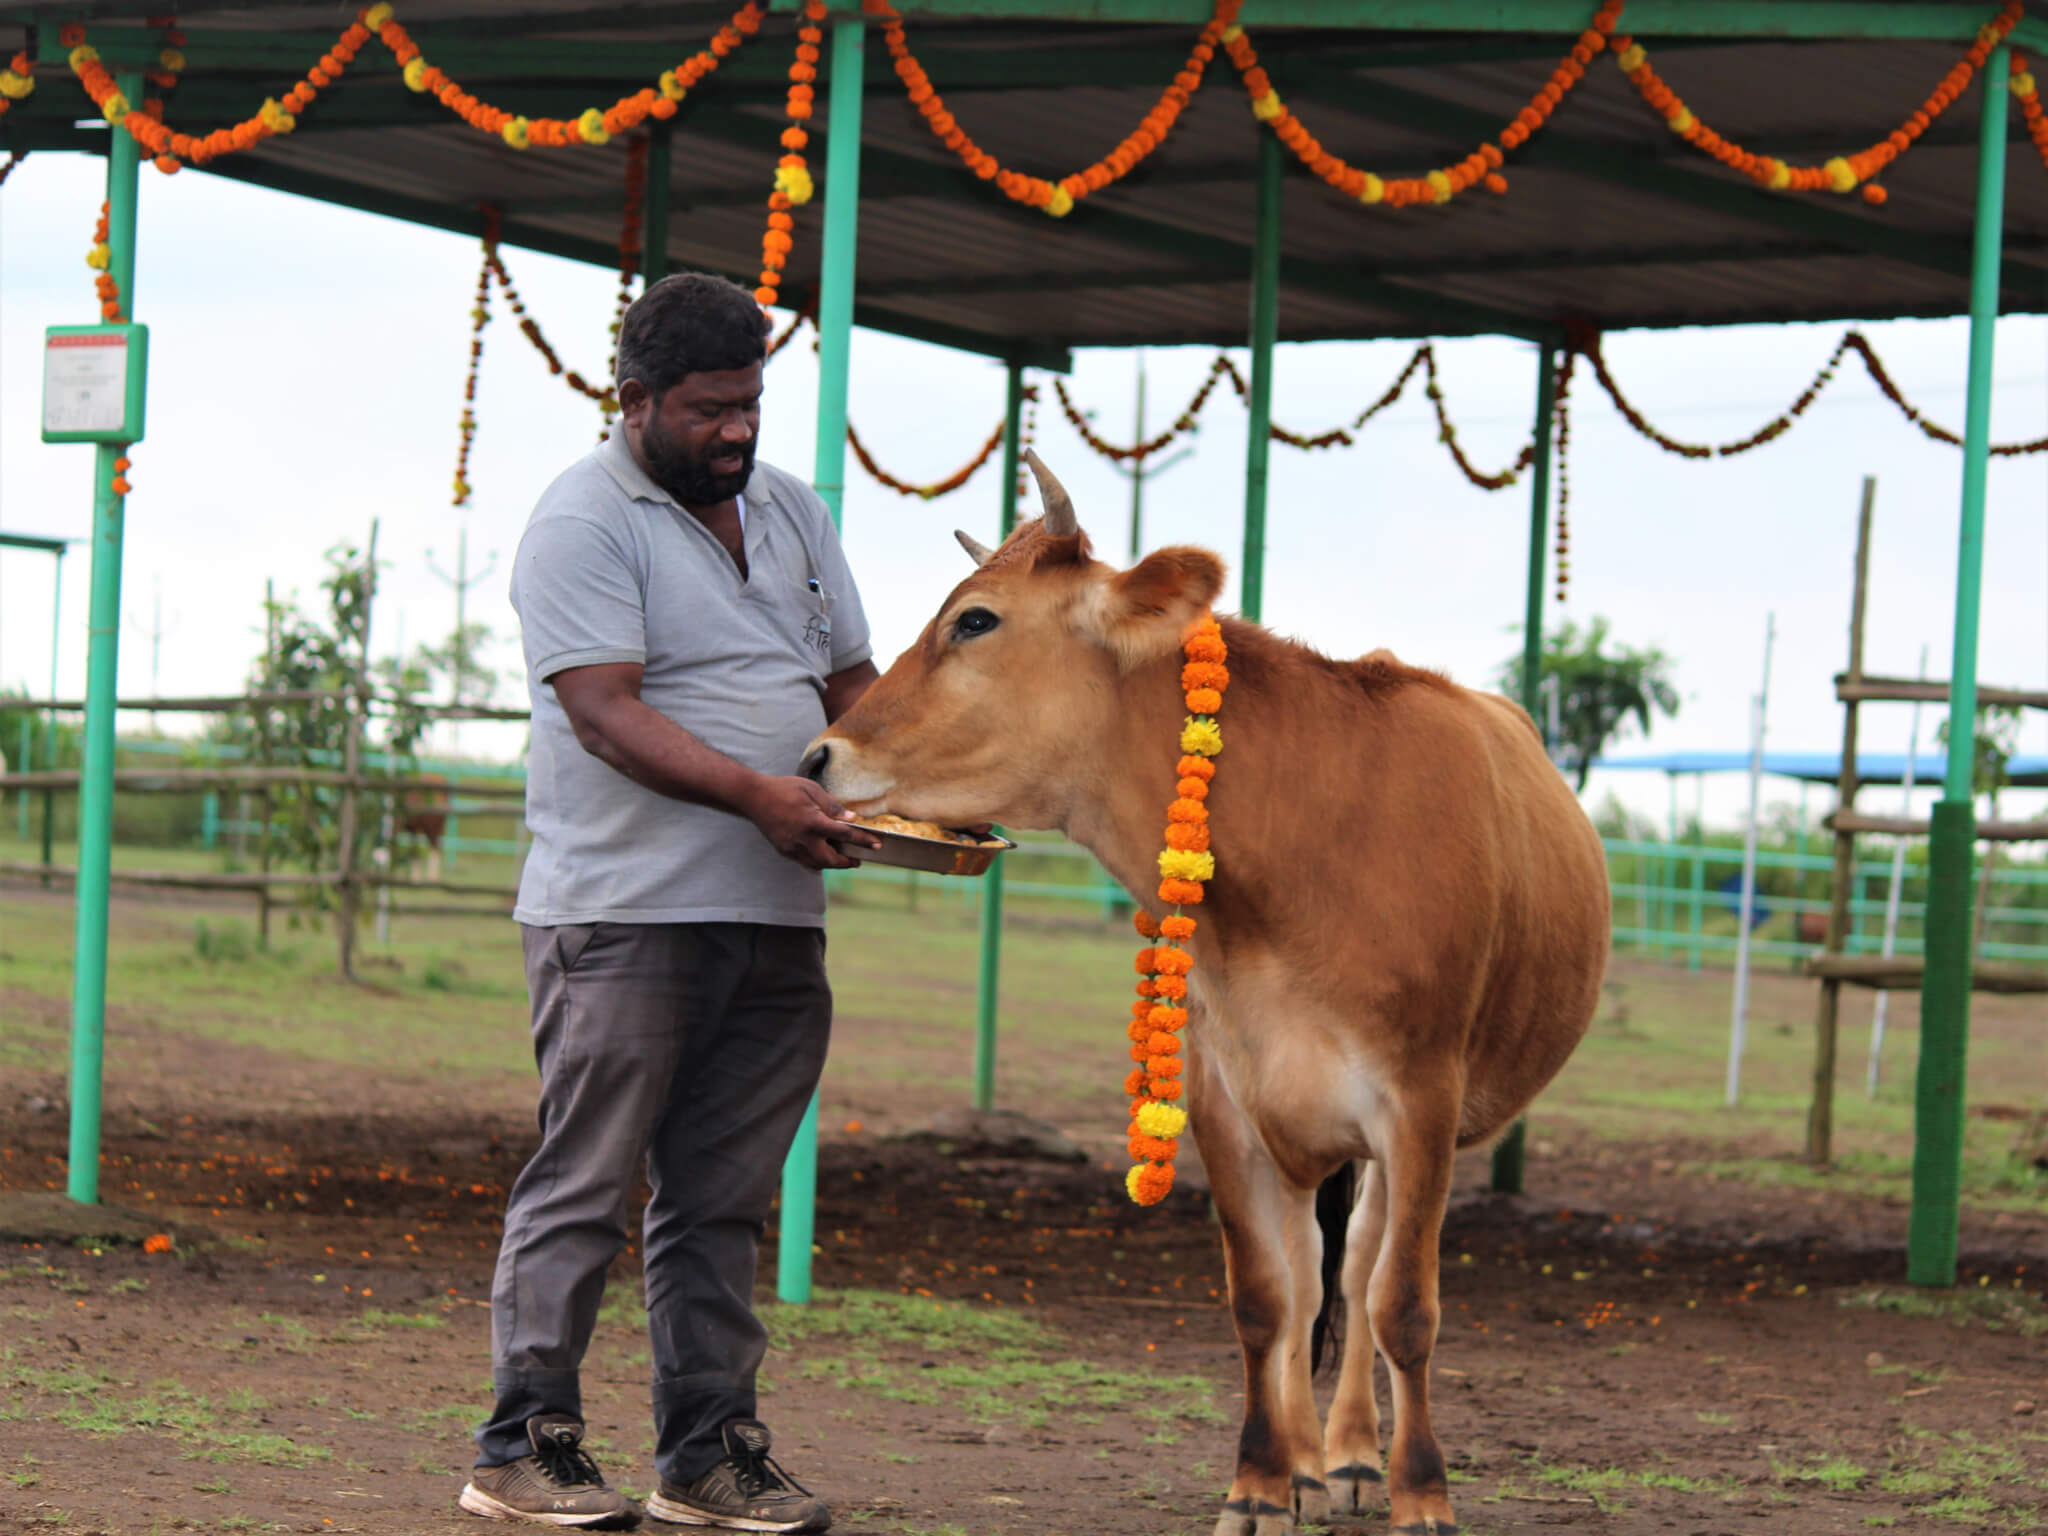 An Animal Rahat staffer feeds fresh fruit to rescued calf Sheila, who's wearing a festive marigold garland.